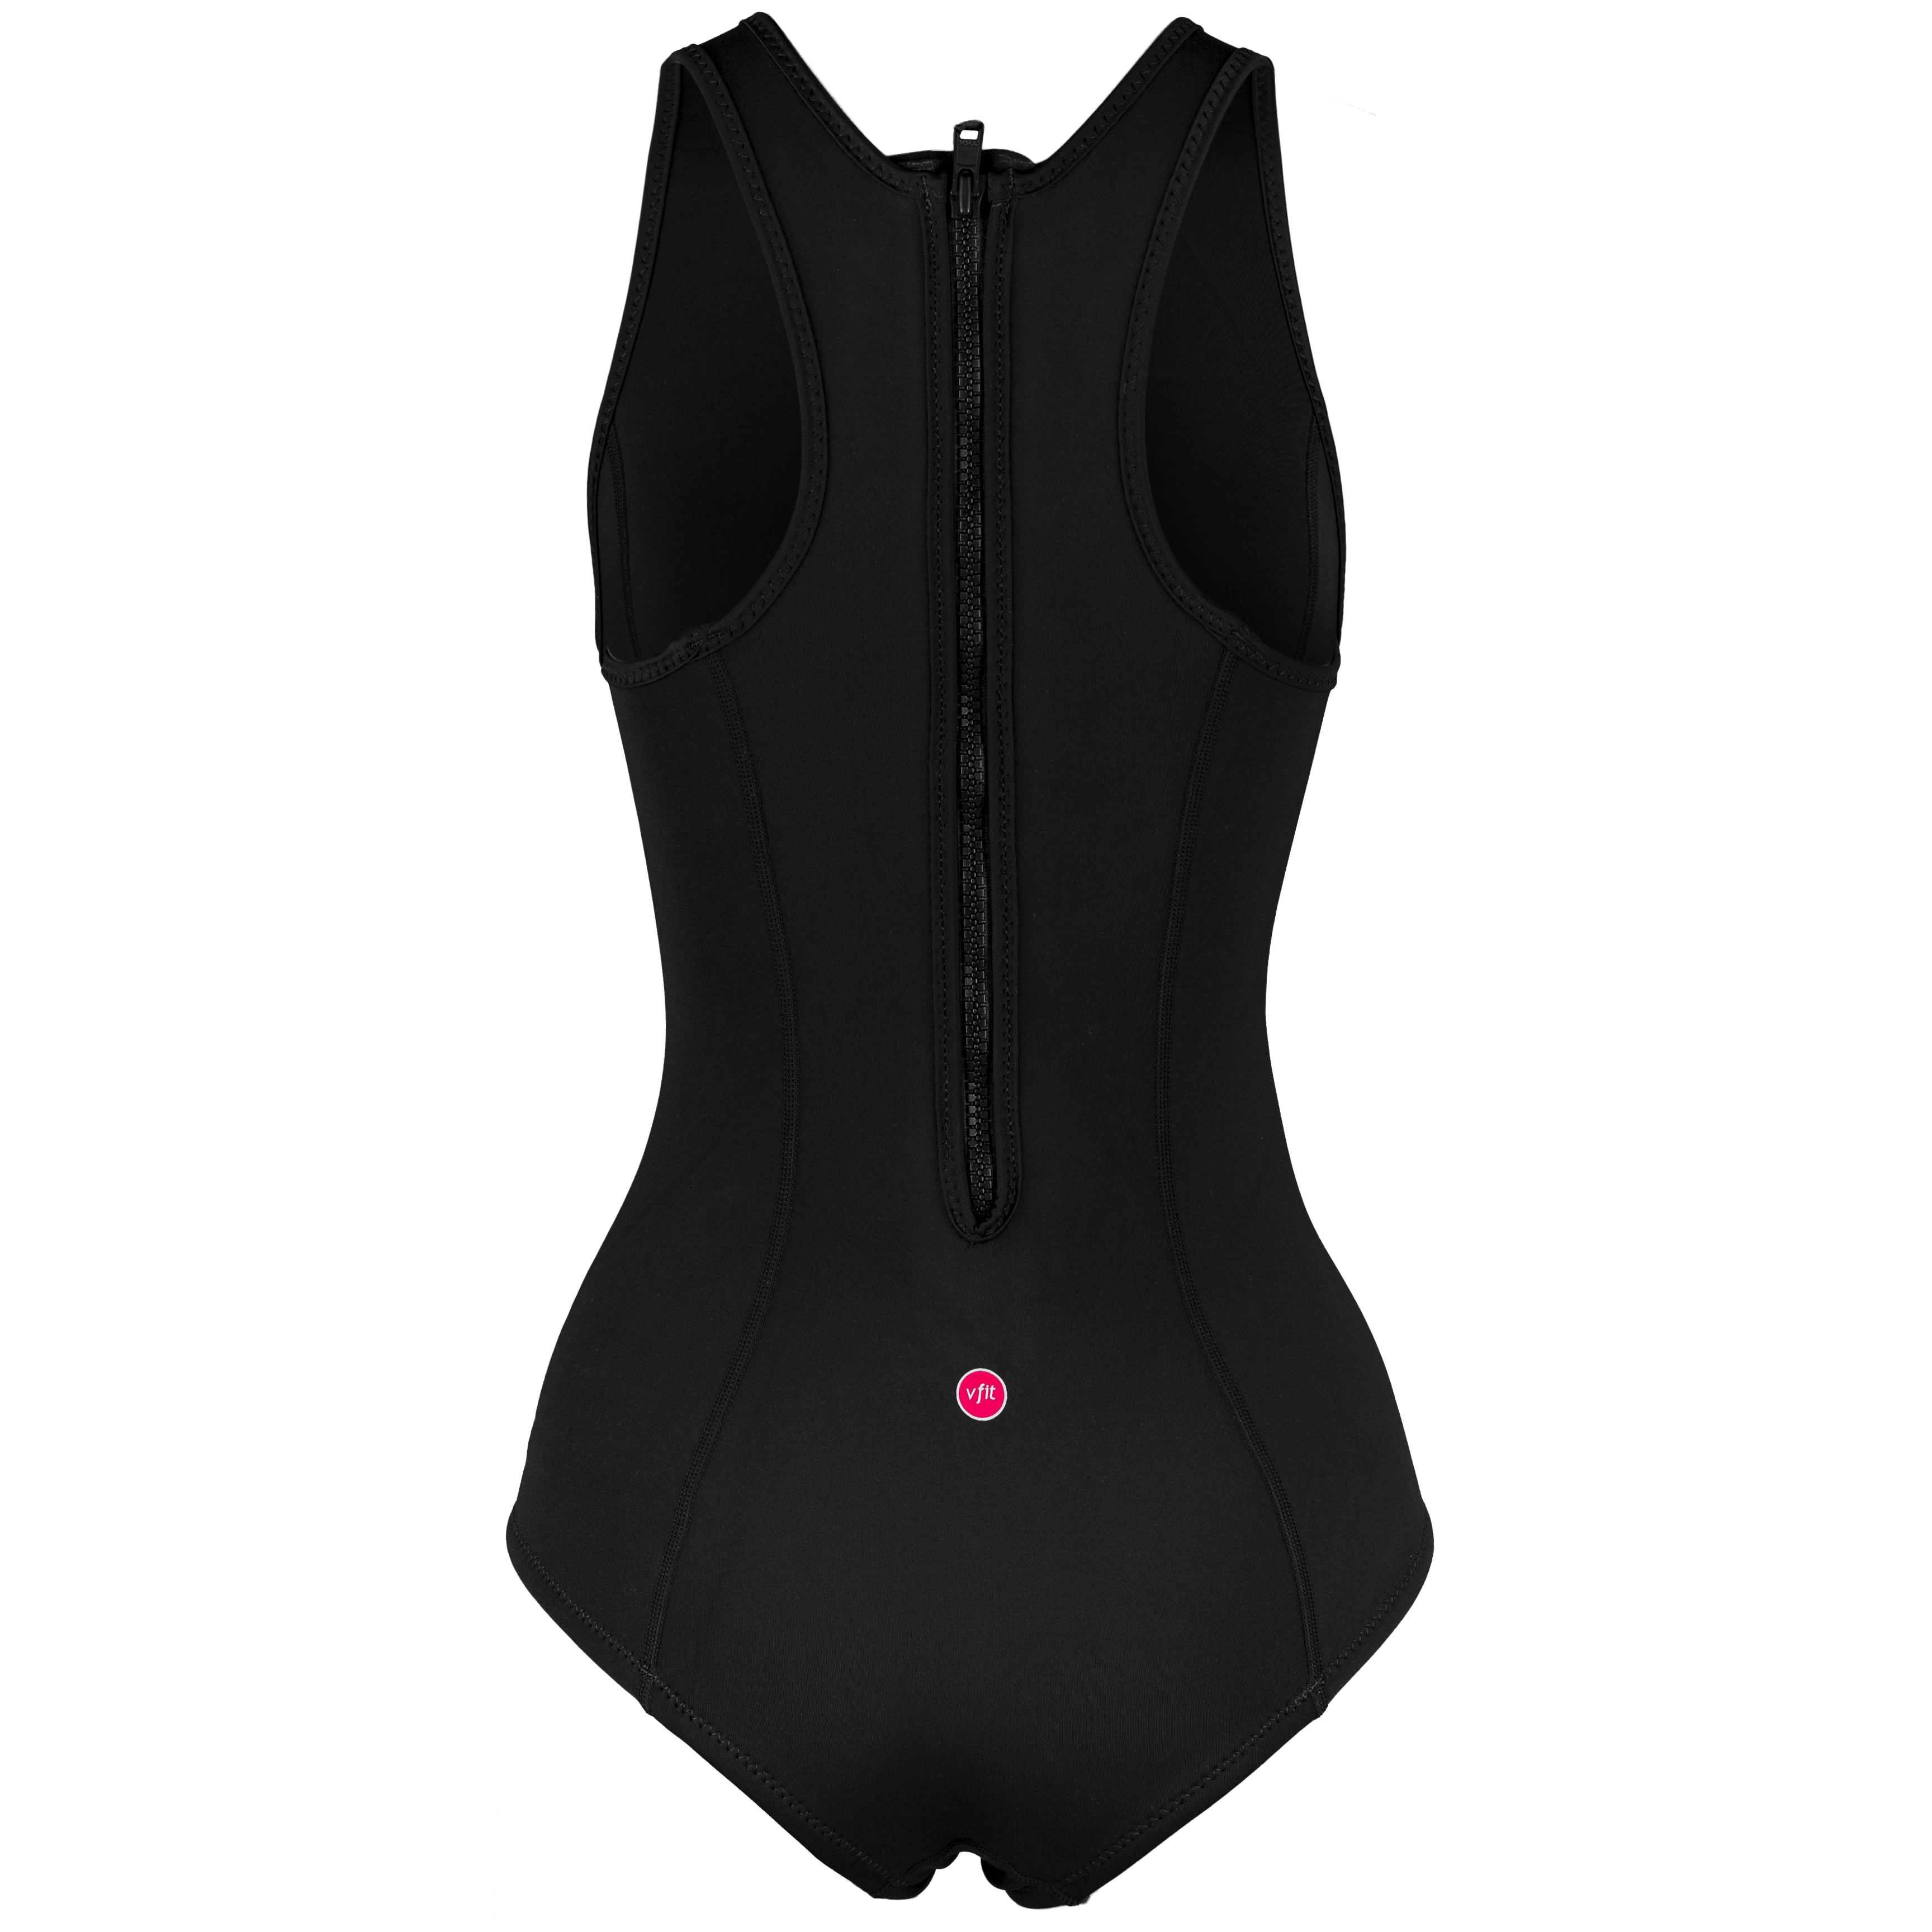 orca Trisuits Neoprene Womens One Piece